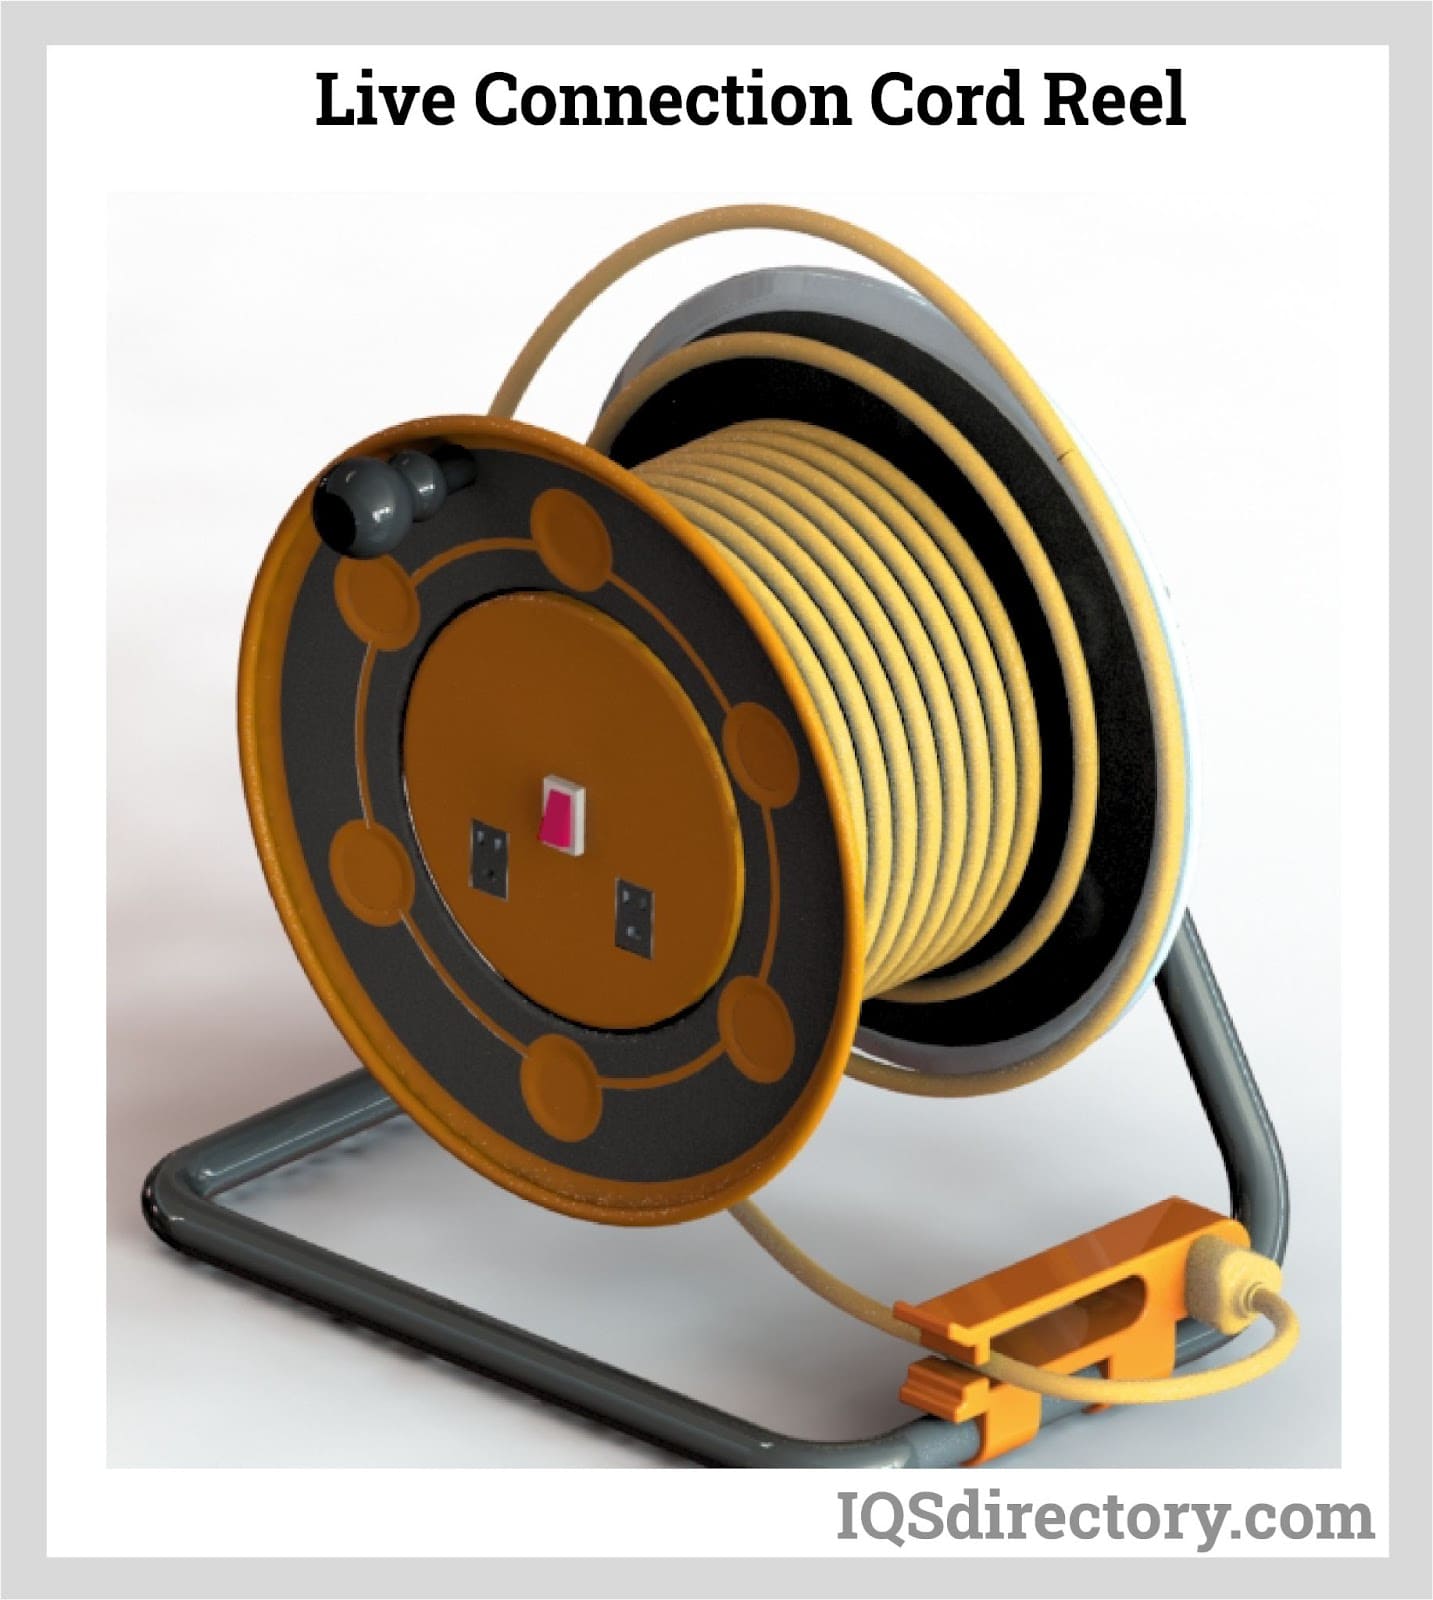 Cord Reels: Types, Configurations, Selection, and Requirements